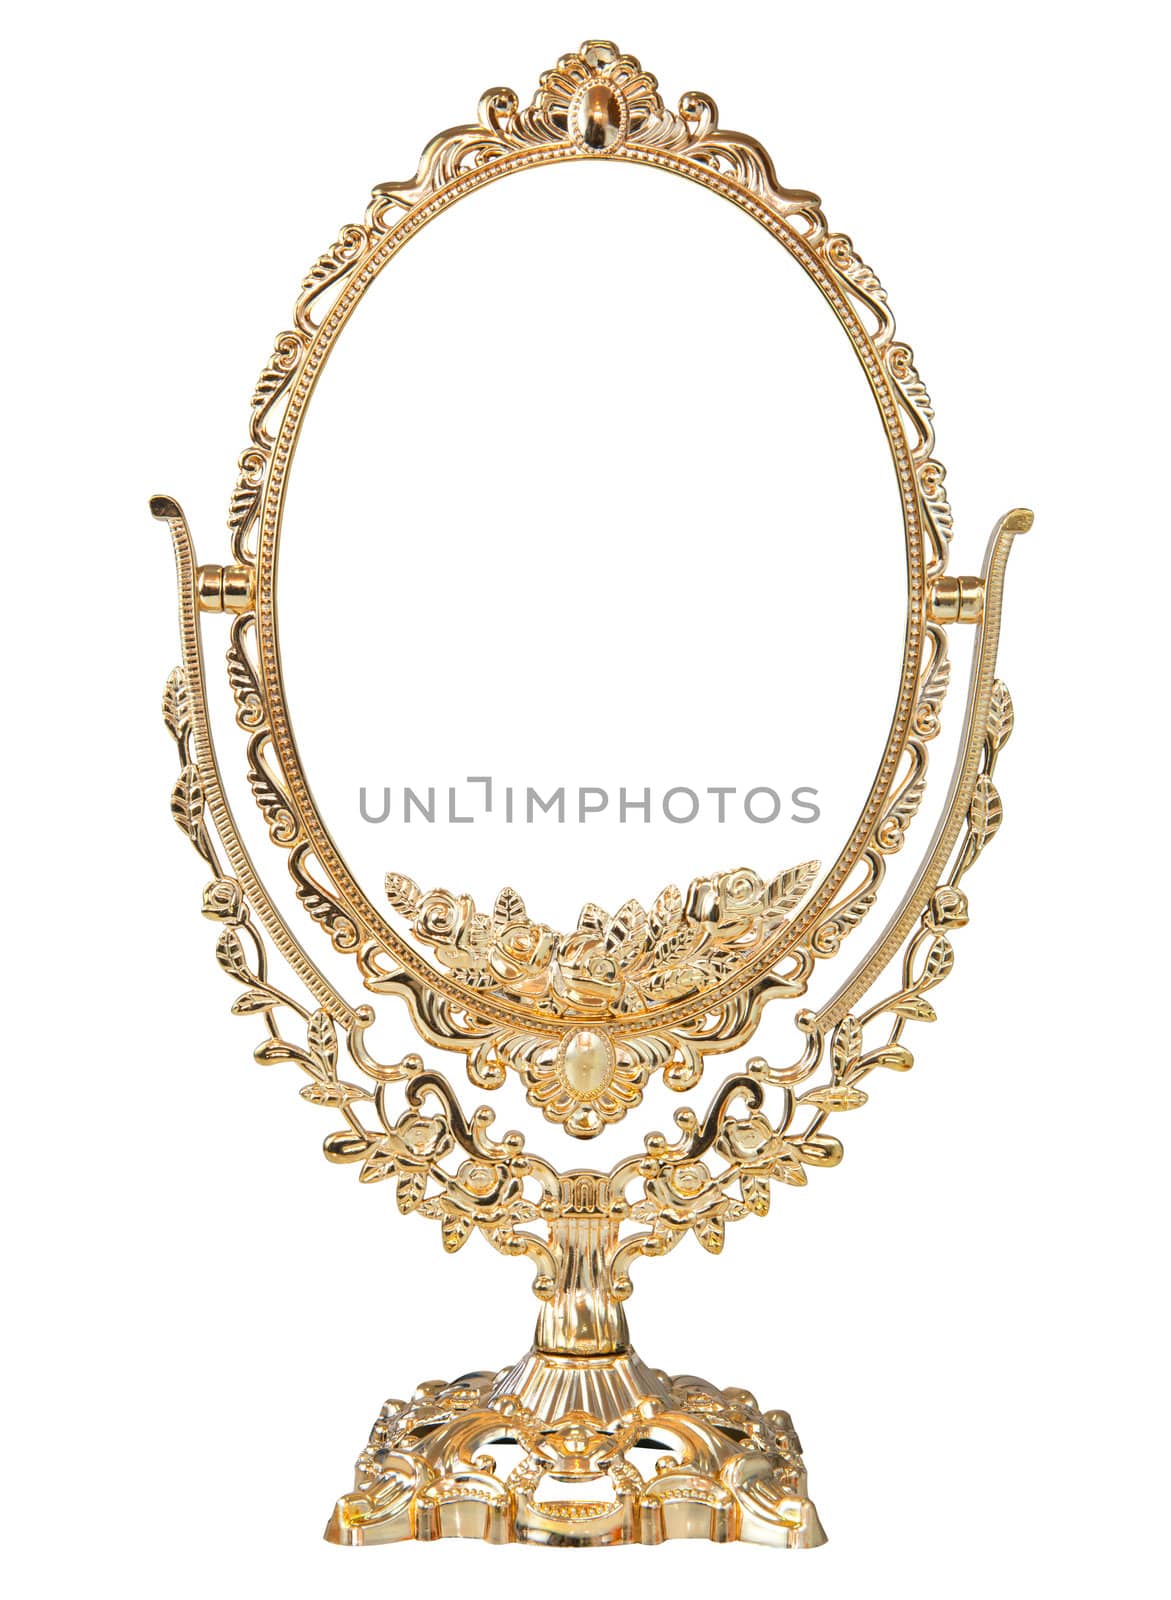 Antique baroque brass gold frame and mirror isolated on white background